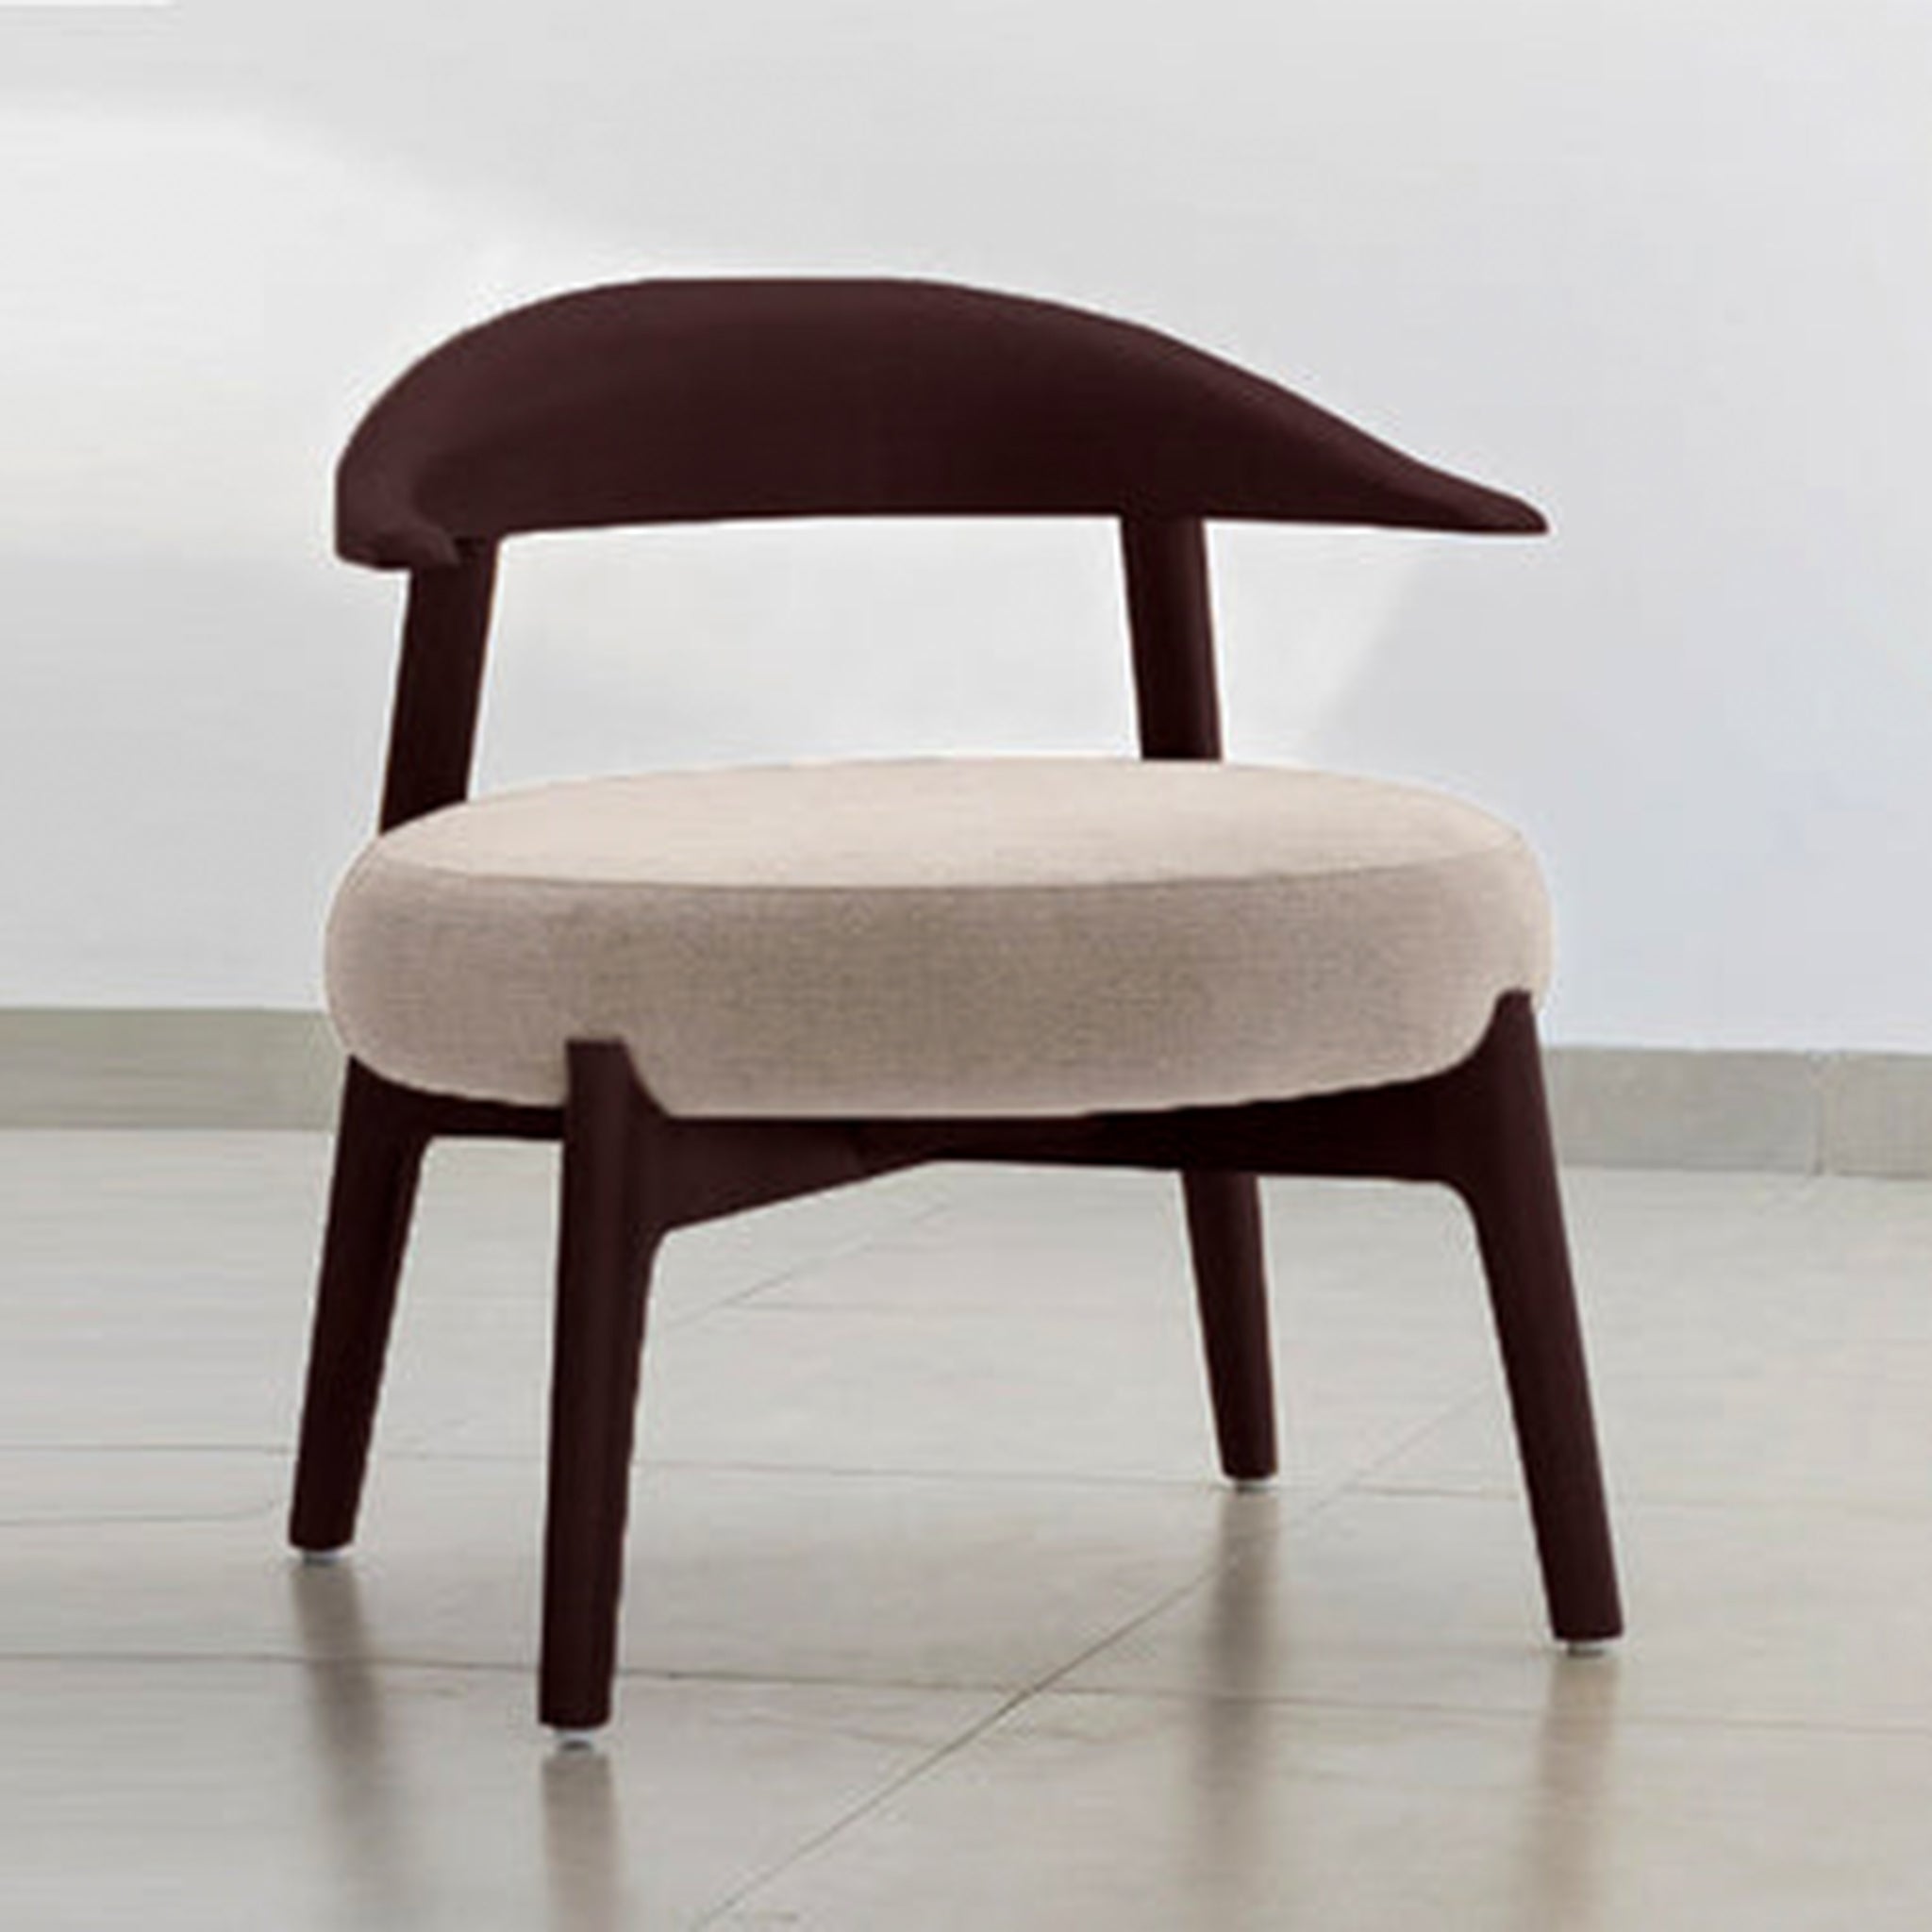 "Modern Hyde Accent Chair with elegant wooden curves"